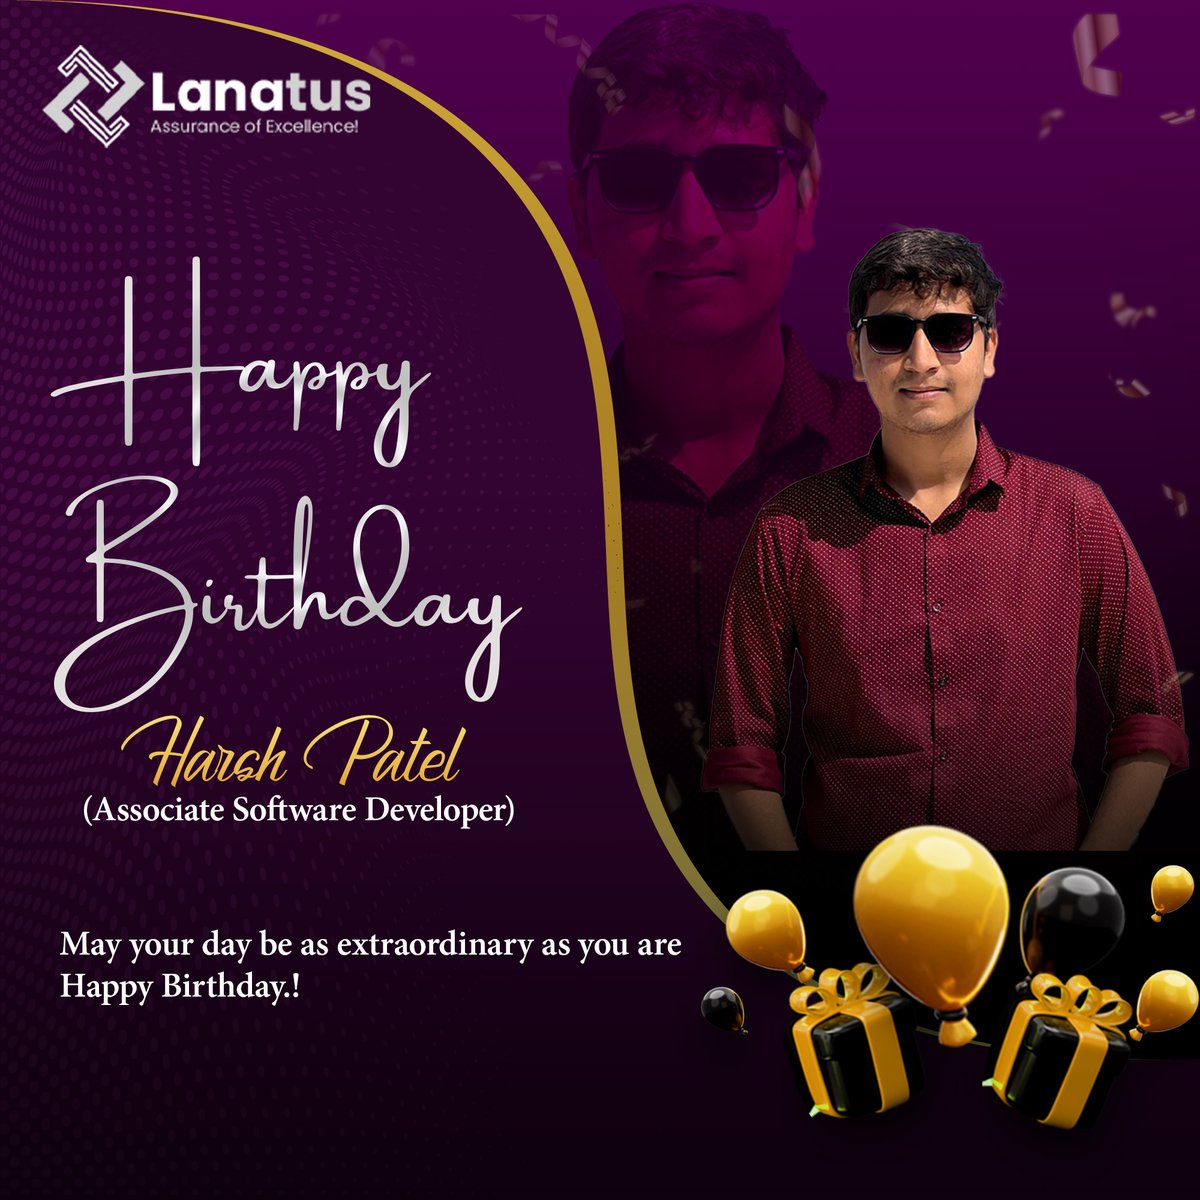 Wishing you a relaxing birthday and joy and happiness in the year to come. harsh Patel

#birthdaycelebrations #birthday #happy #happiness #wishes #birthdayboy #postoftheday #post #picoftheday #linkedinconnection #linkedinfamily #linkedin #growtogether #letsconnect